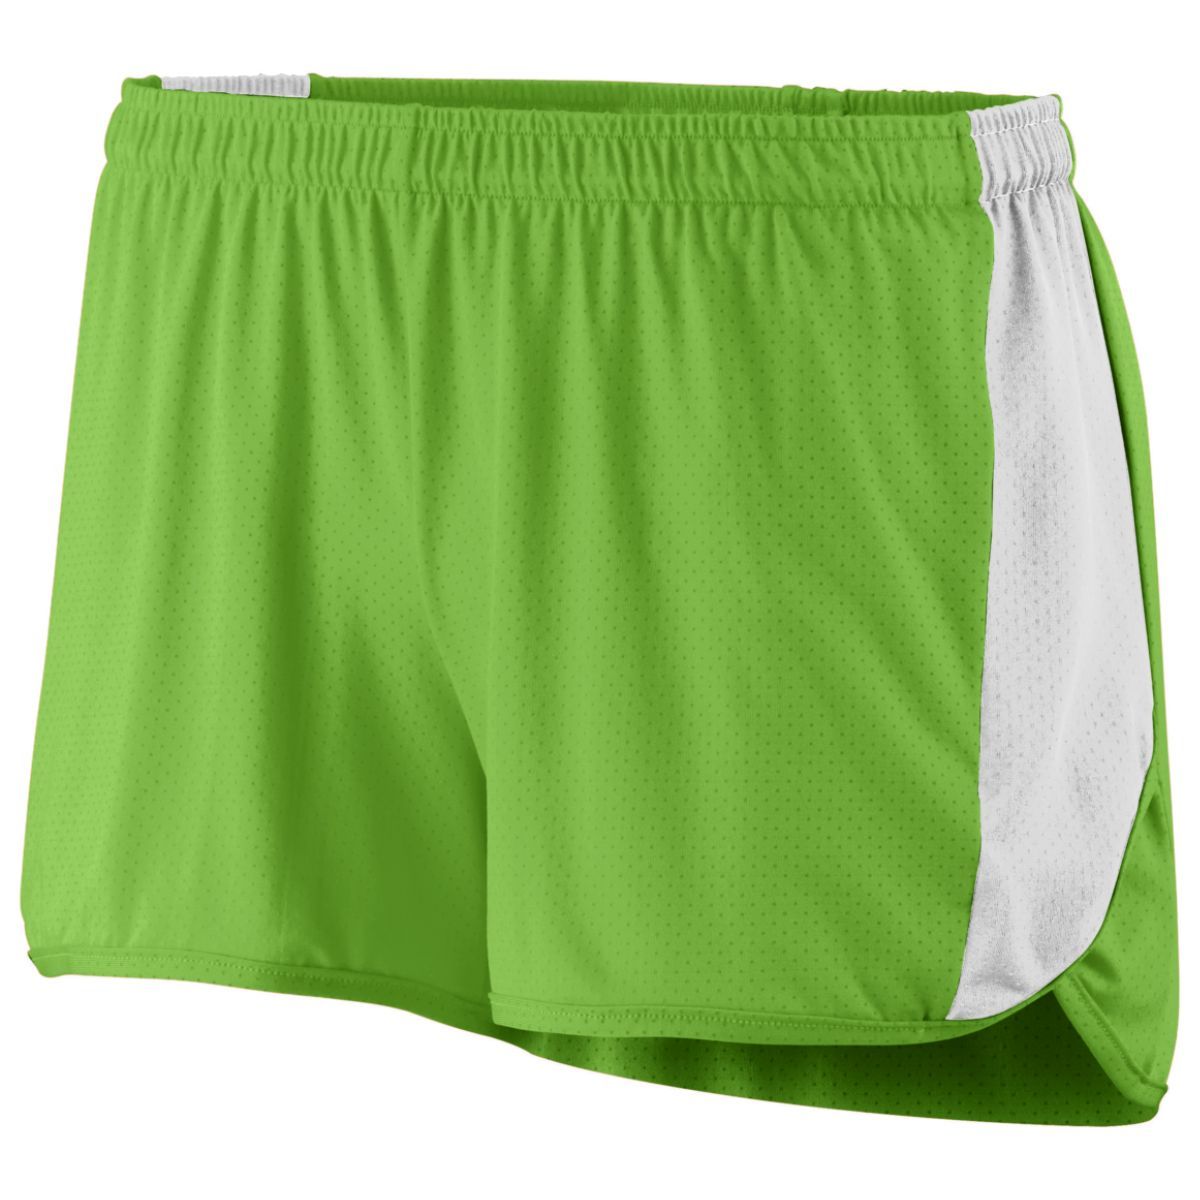 Augusta Sportswear Ladies Sprint Shorts in Lime/White  -Part of the Ladies, Ladies-Shorts, Augusta-Products, Track-Field product lines at KanaleyCreations.com